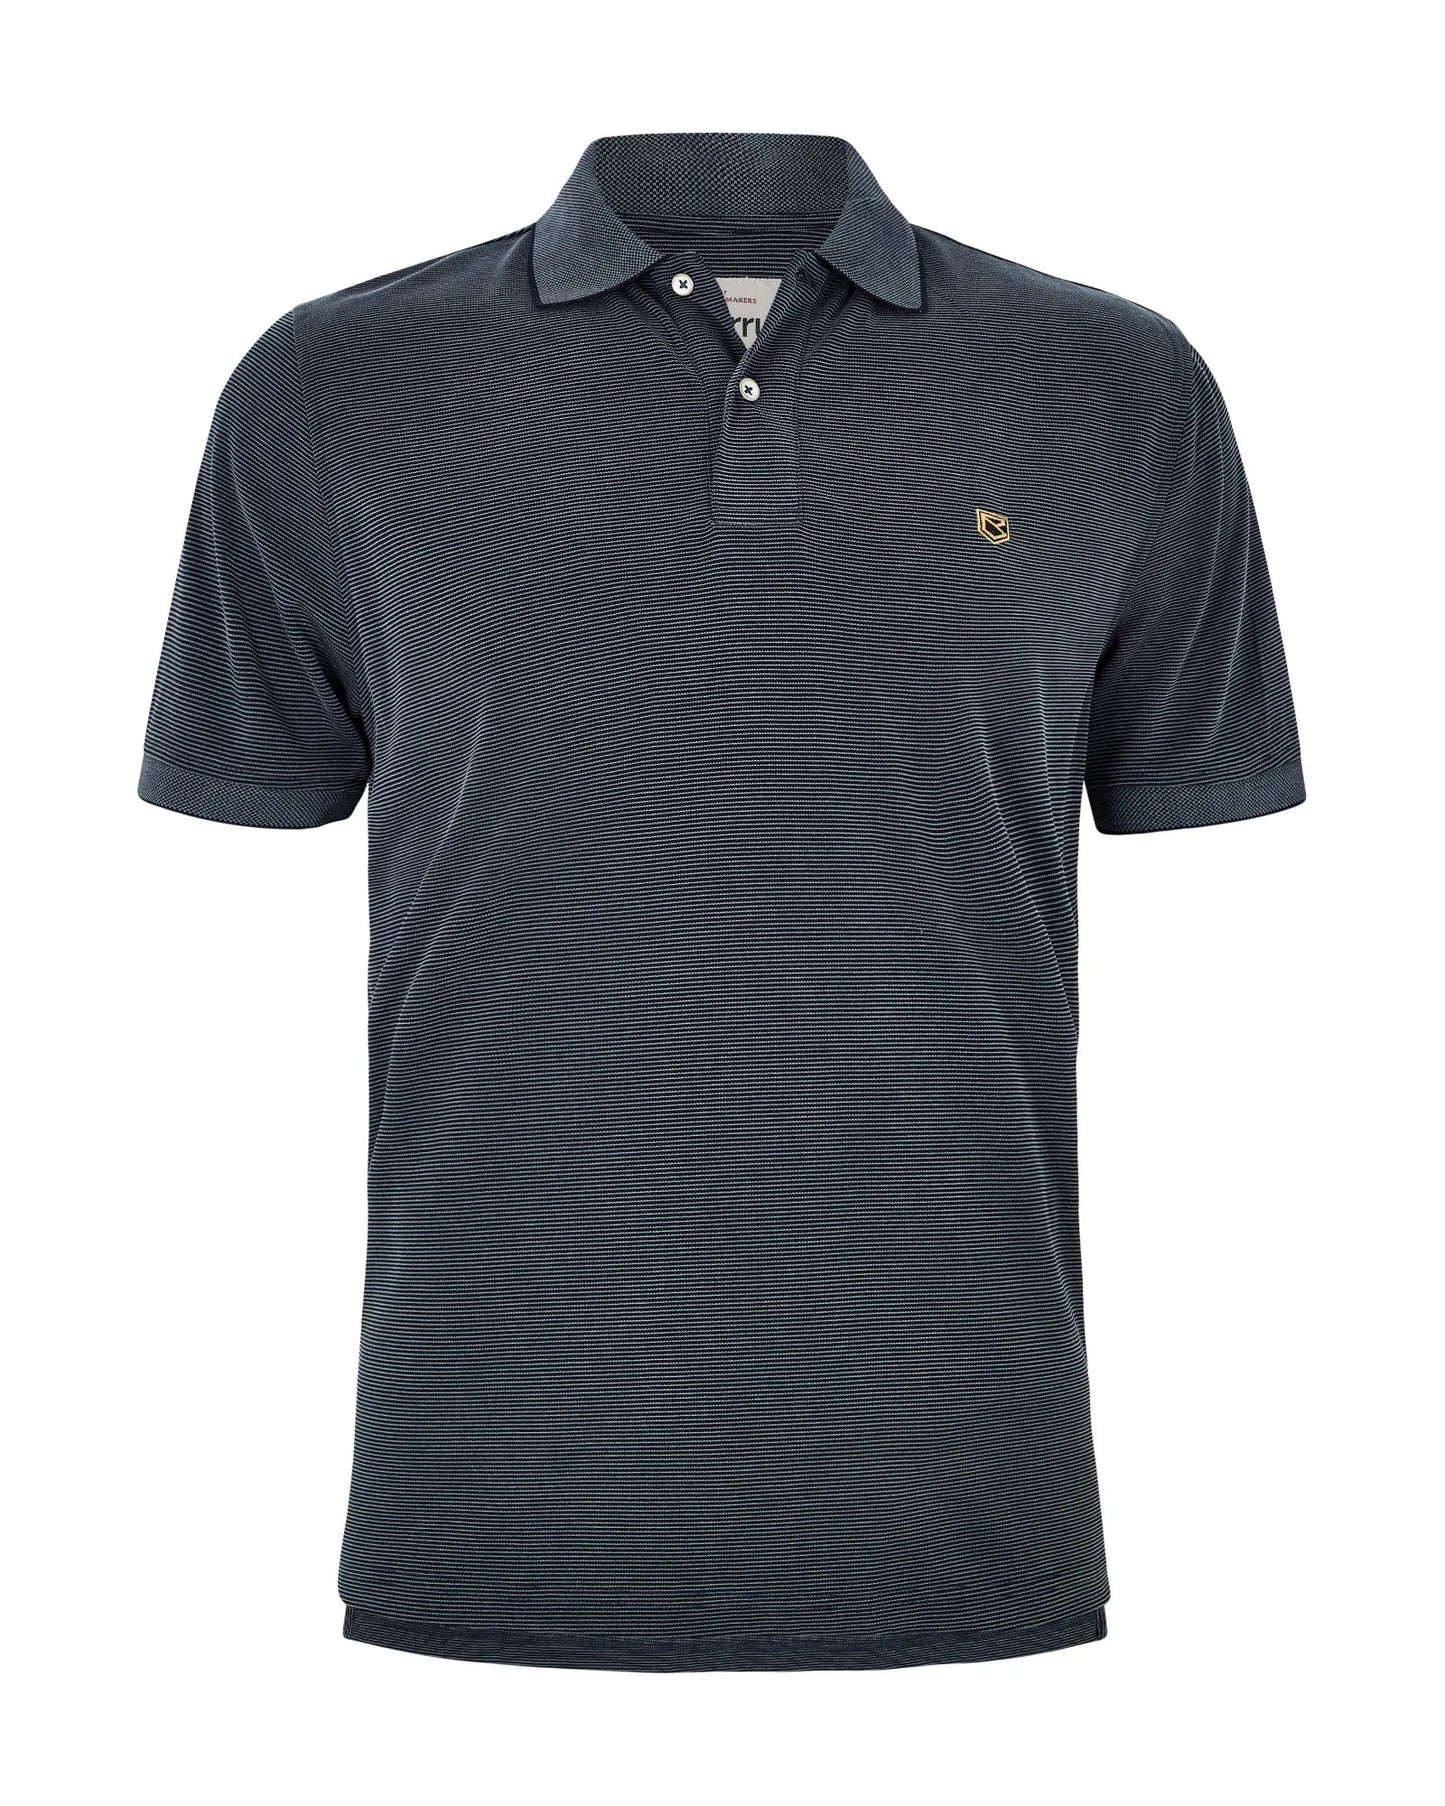 Mullaghmore Polo - Steel